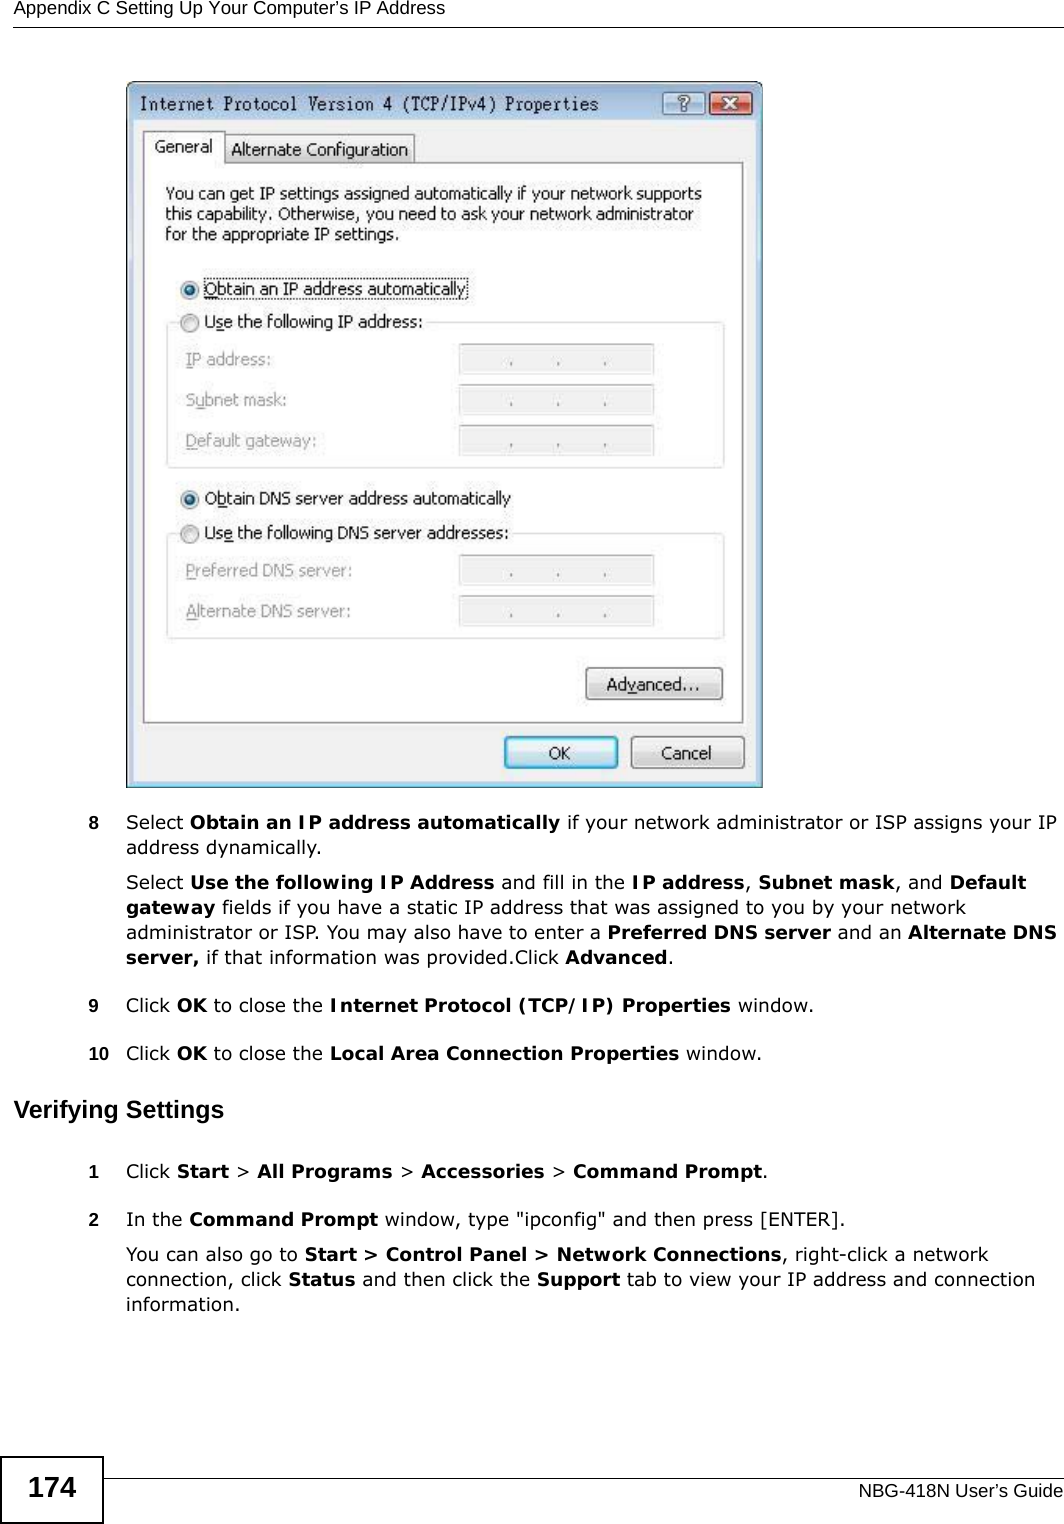 Appendix C Setting Up Your Computer’s IP AddressNBG-418N User’s Guide1748Select Obtain an IP address automatically if your network administrator or ISP assigns your IP address dynamically.Select Use the following IP Address and fill in the IP address, Subnet mask, and Default gateway fields if you have a static IP address that was assigned to you by your network administrator or ISP. You may also have to enter a Preferred DNS server and an Alternate DNS server, if that information was provided.Click Advanced.9Click OK to close the Internet Protocol (TCP/IP) Properties window.10 Click OK to close the Local Area Connection Properties window.Verifying Settings1Click Start &gt; All Programs &gt; Accessories &gt; Command Prompt.2In the Command Prompt window, type &quot;ipconfig&quot; and then press [ENTER]. You can also go to Start &gt; Control Panel &gt; Network Connections, right-click a network connection, click Status and then click the Support tab to view your IP address and connection information.